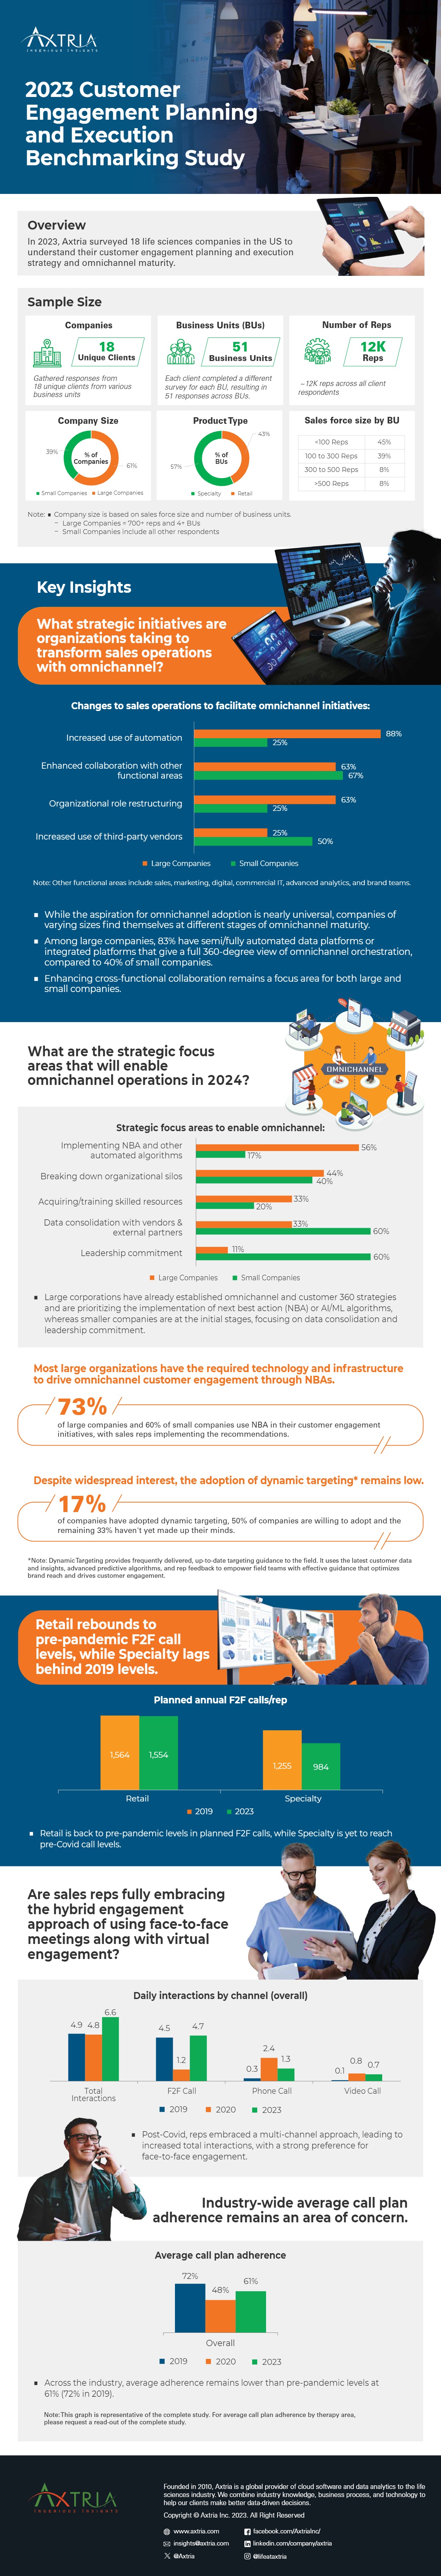 Axtria-Insights-Report-2023-Customer-Engagement-Planning-and-Execution-Benchmarking-Study-Cover